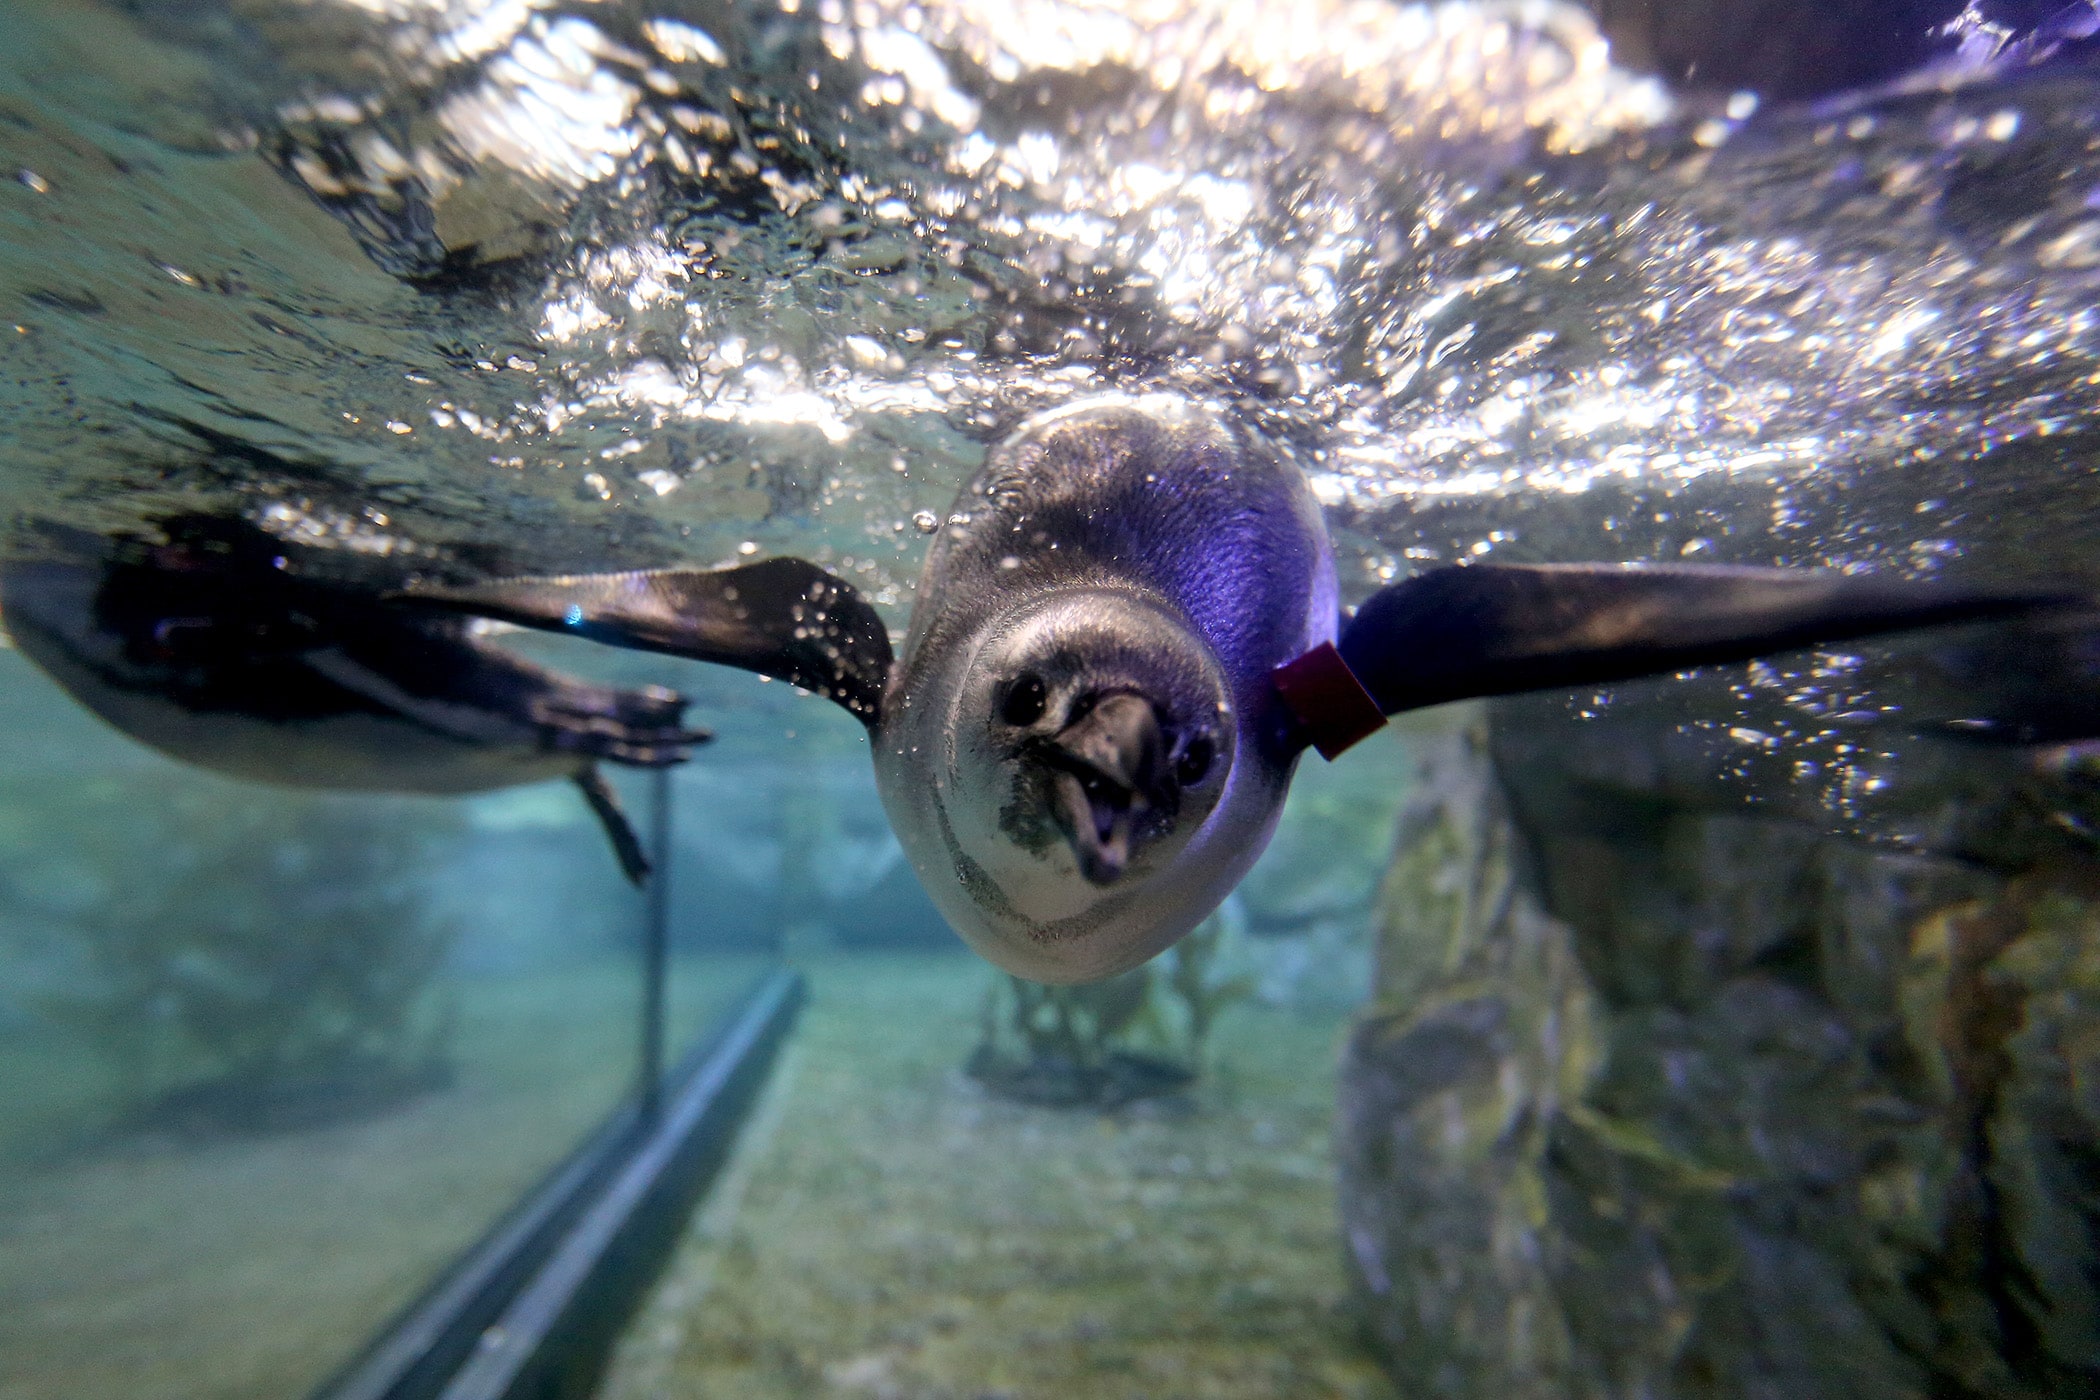 Zion the penguin checks out visitors to his exhibit as the Audubon Aquarium of the Americas reopened to visitors for the first time in four months on Thursday, July 16, 2020. (Photo by Michael DeMocker)